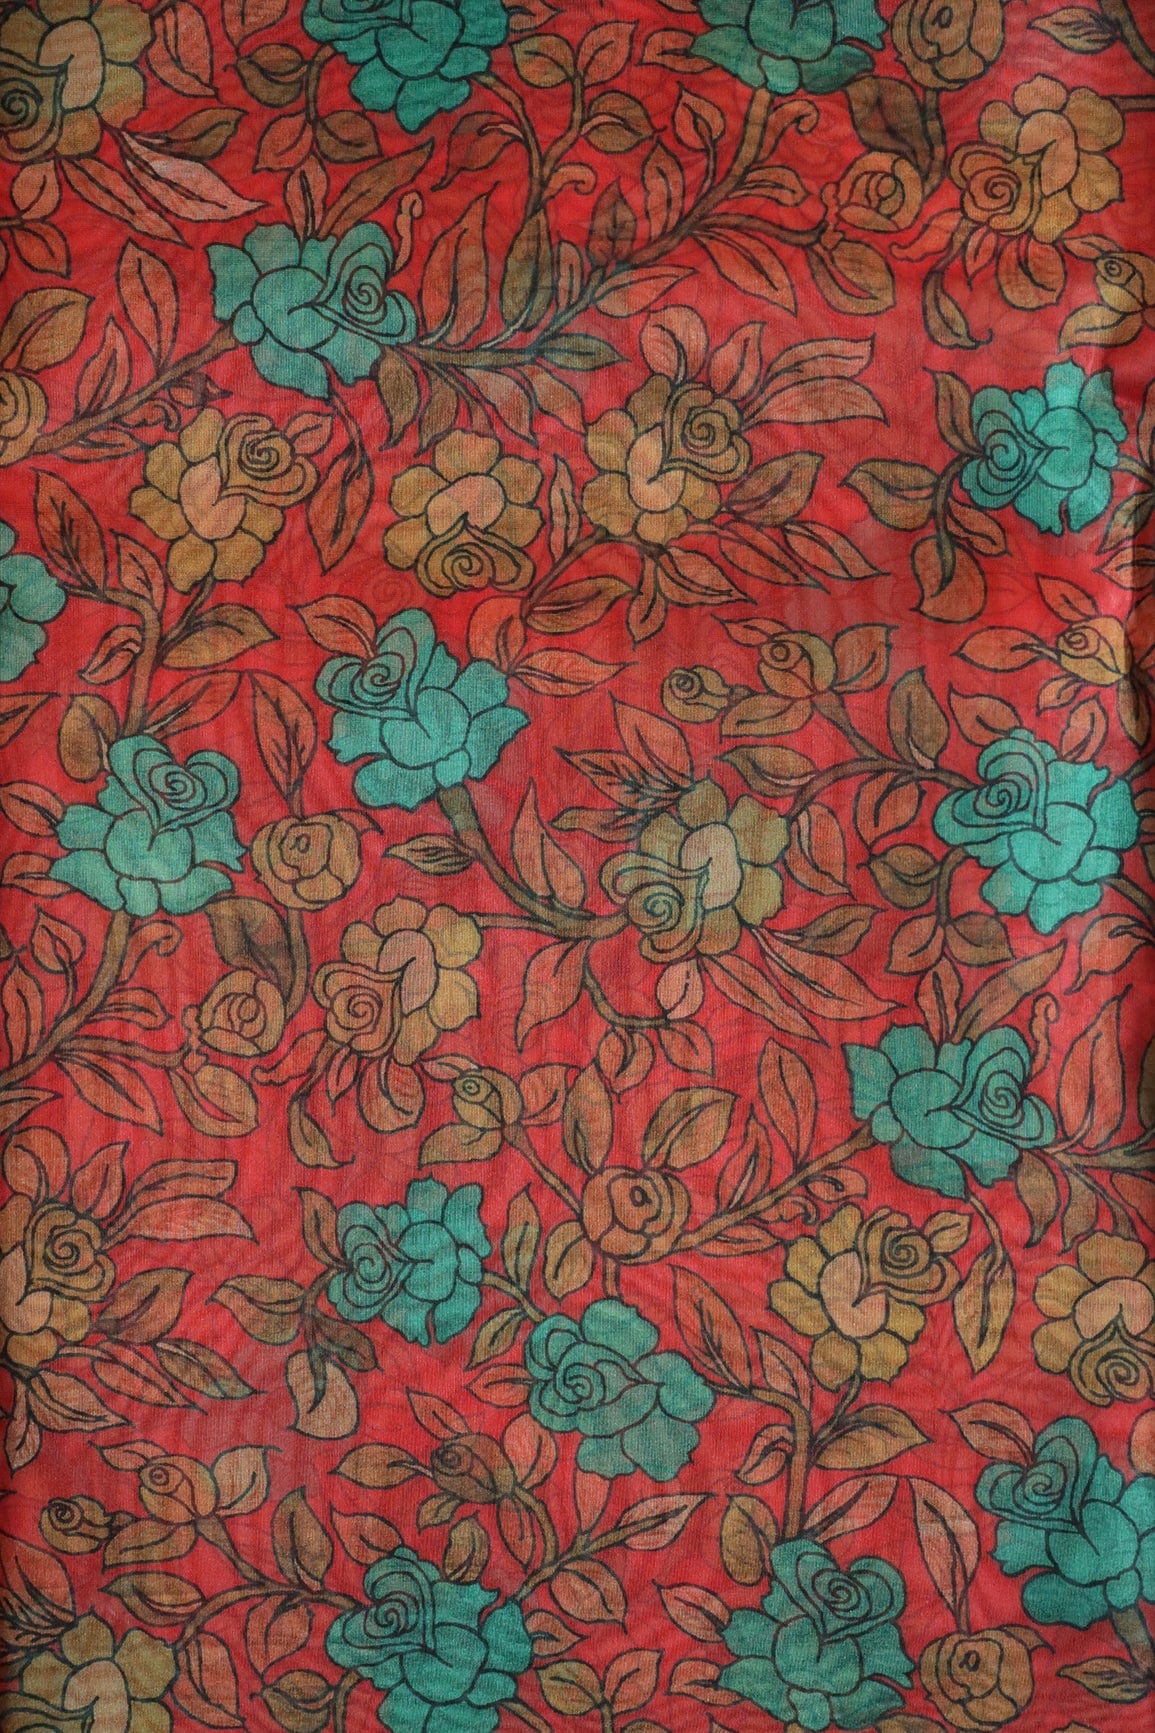 doeraa Prints Turquoise Floral Digital Print On Red Organza Fabric